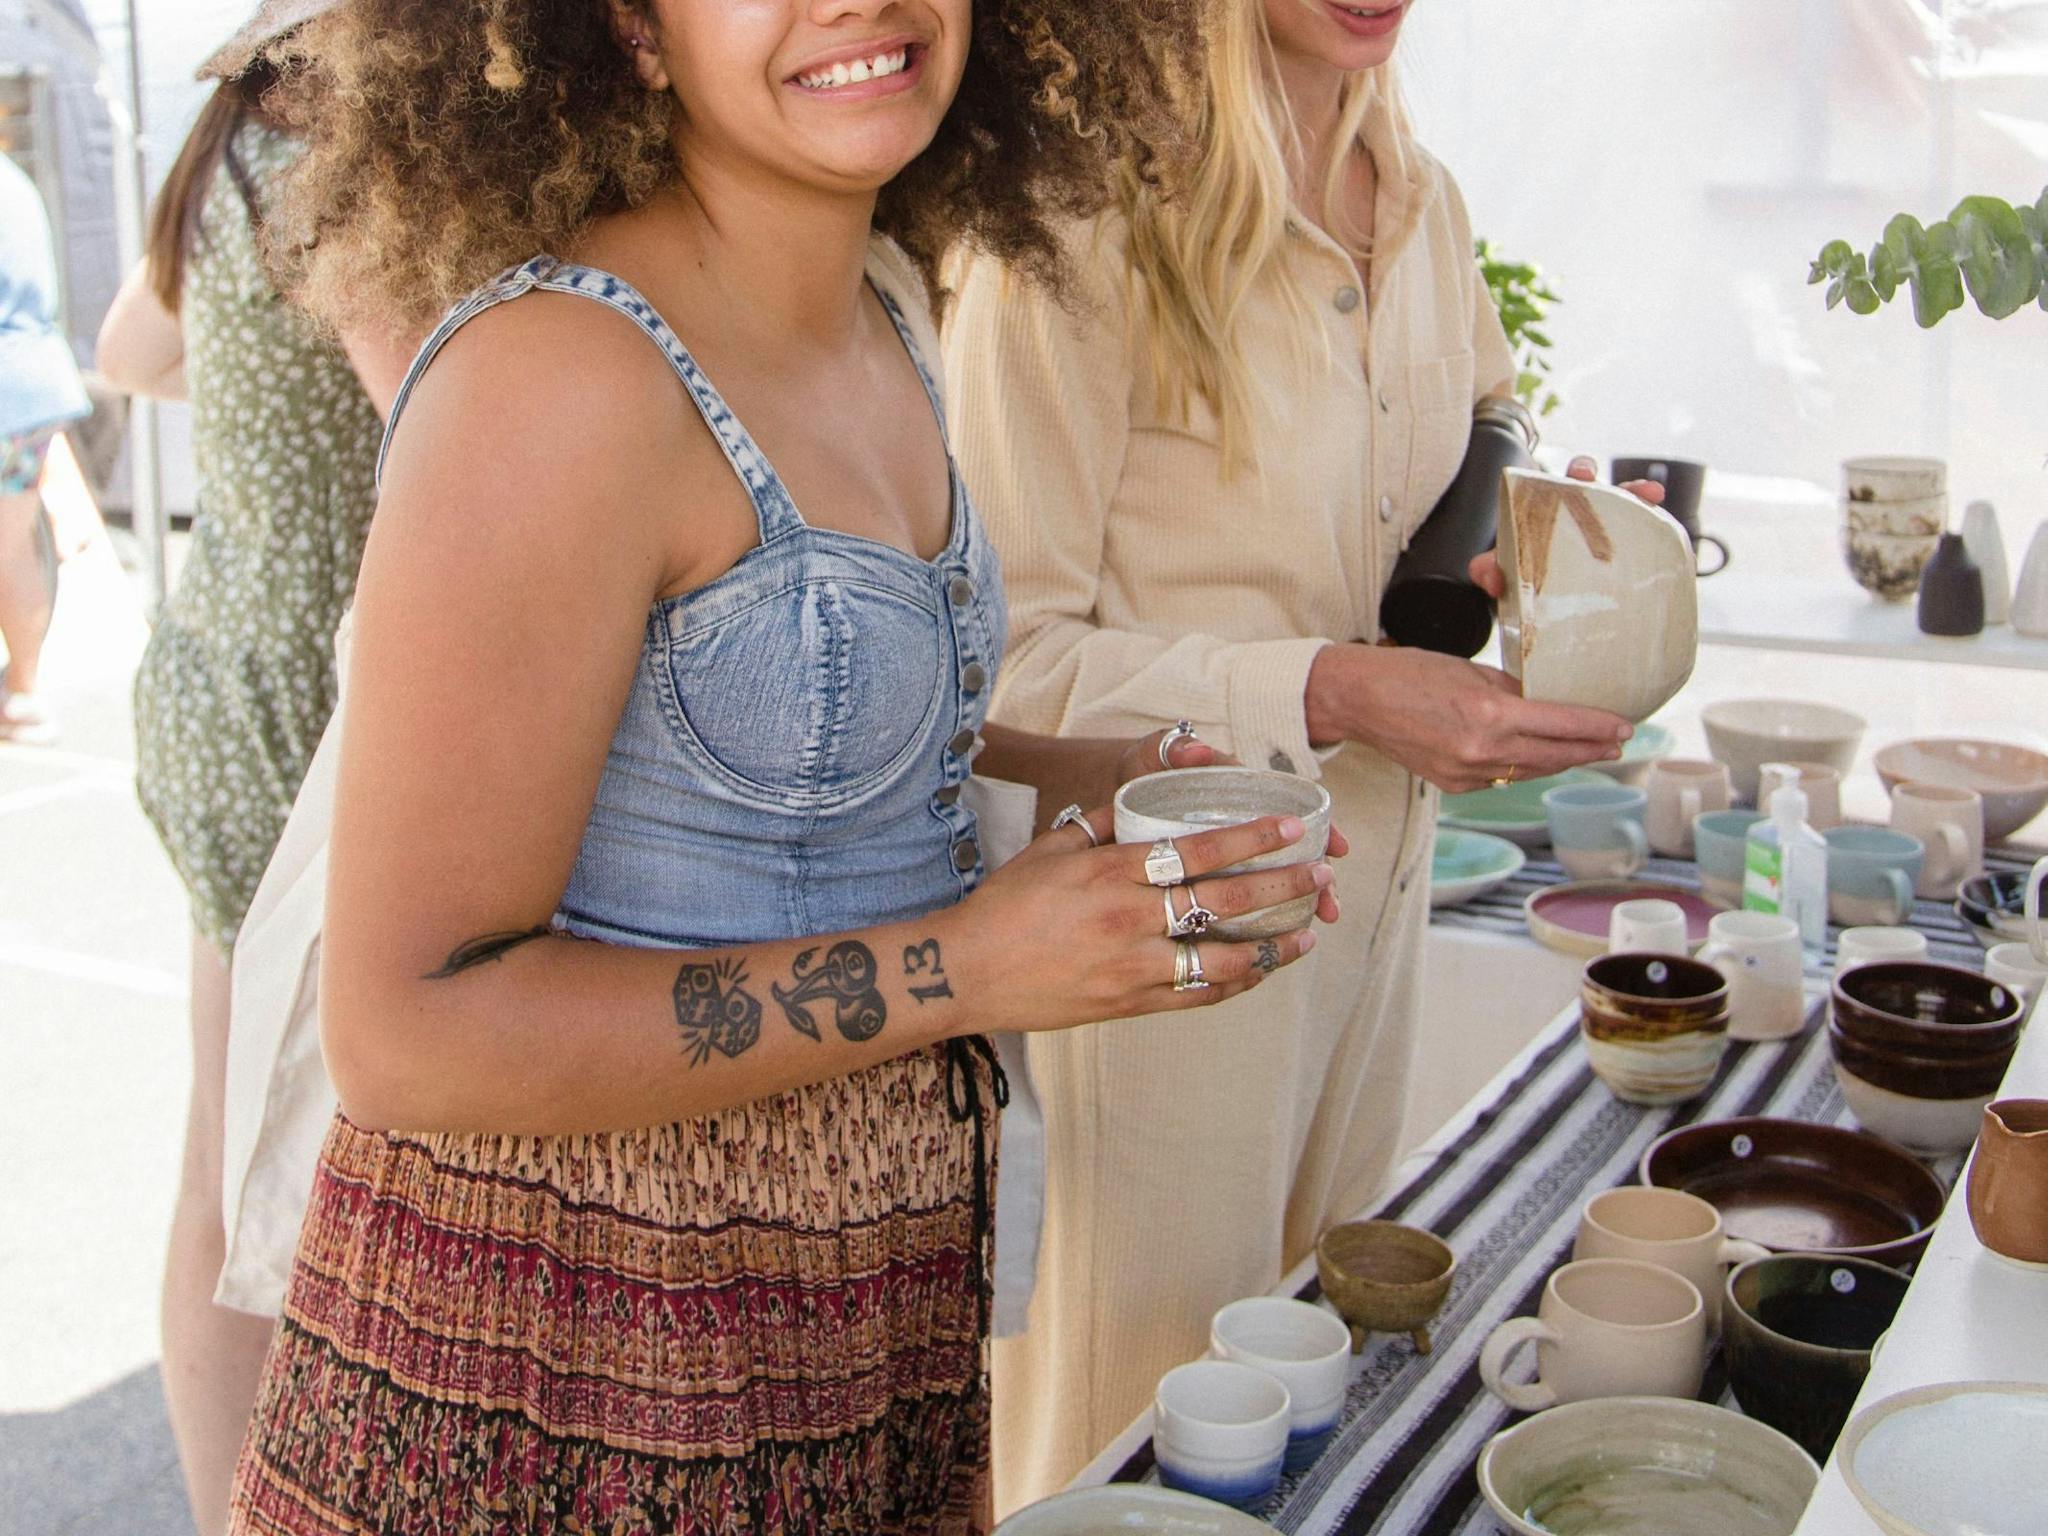 Discover local creative small businesses at The Village Markets